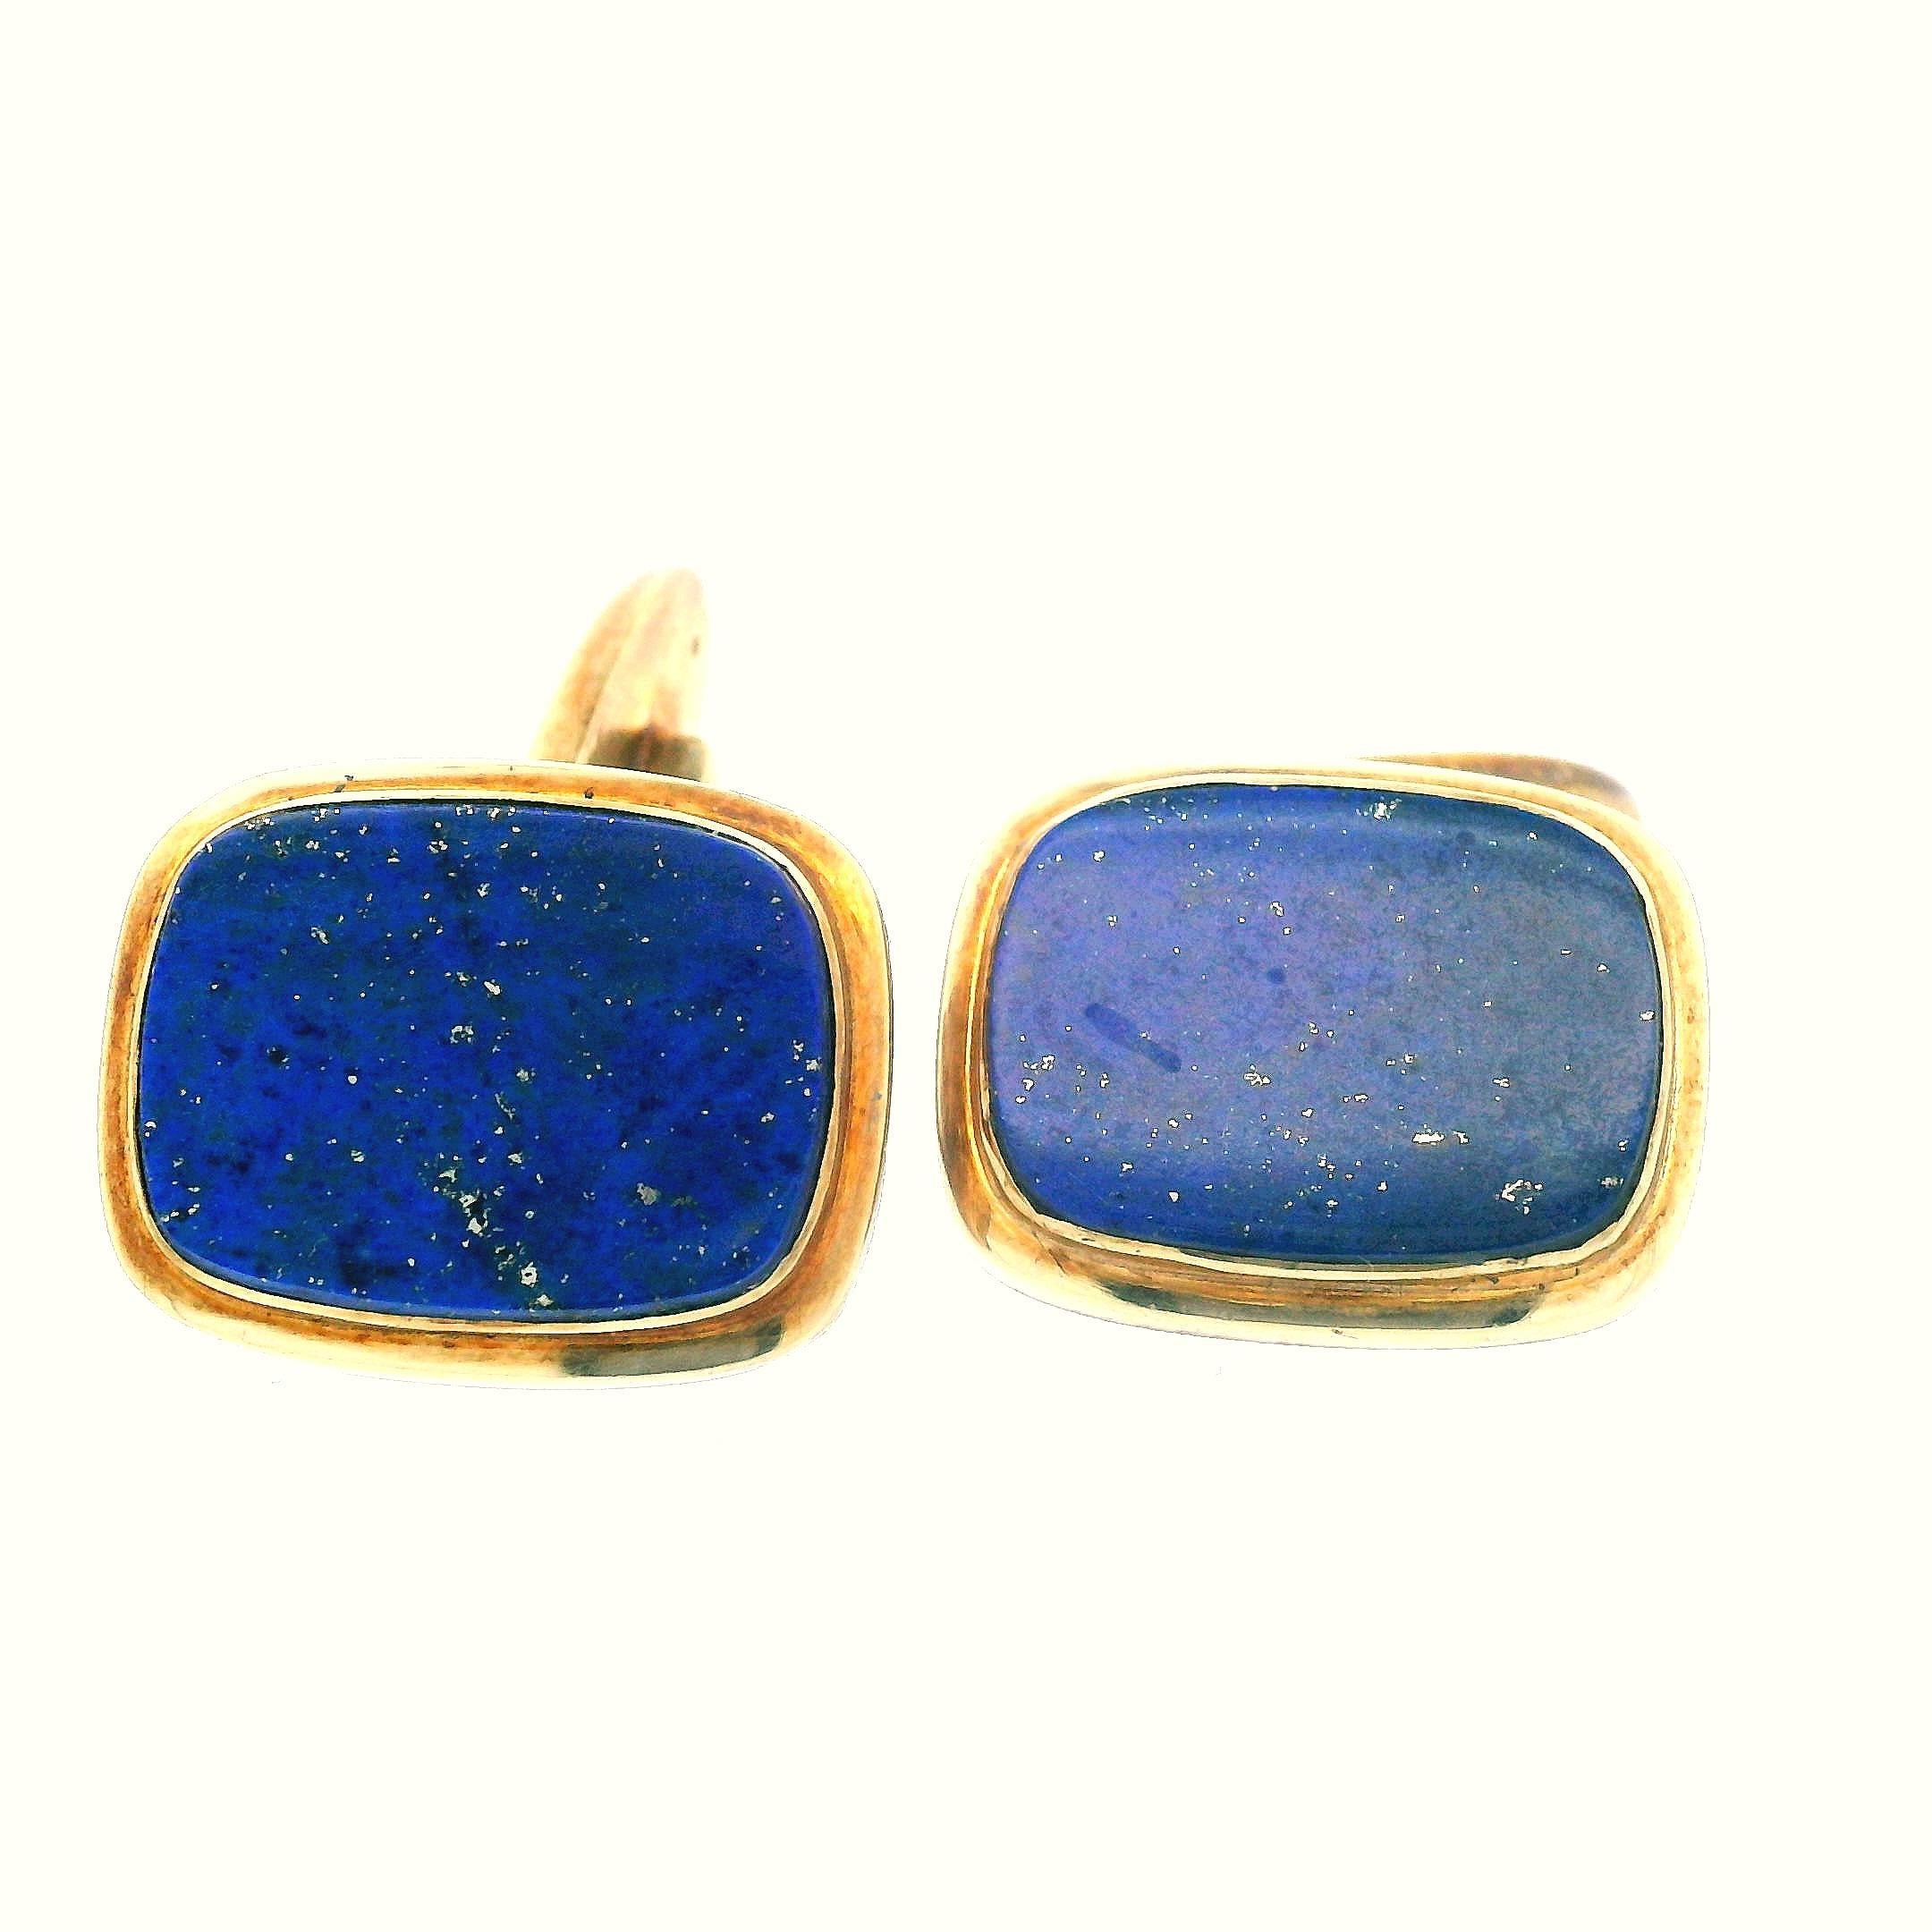 1950s W Germany 14K Yellow Gold Lapis Cufflinks In Good Condition For Sale In Lexington, KY